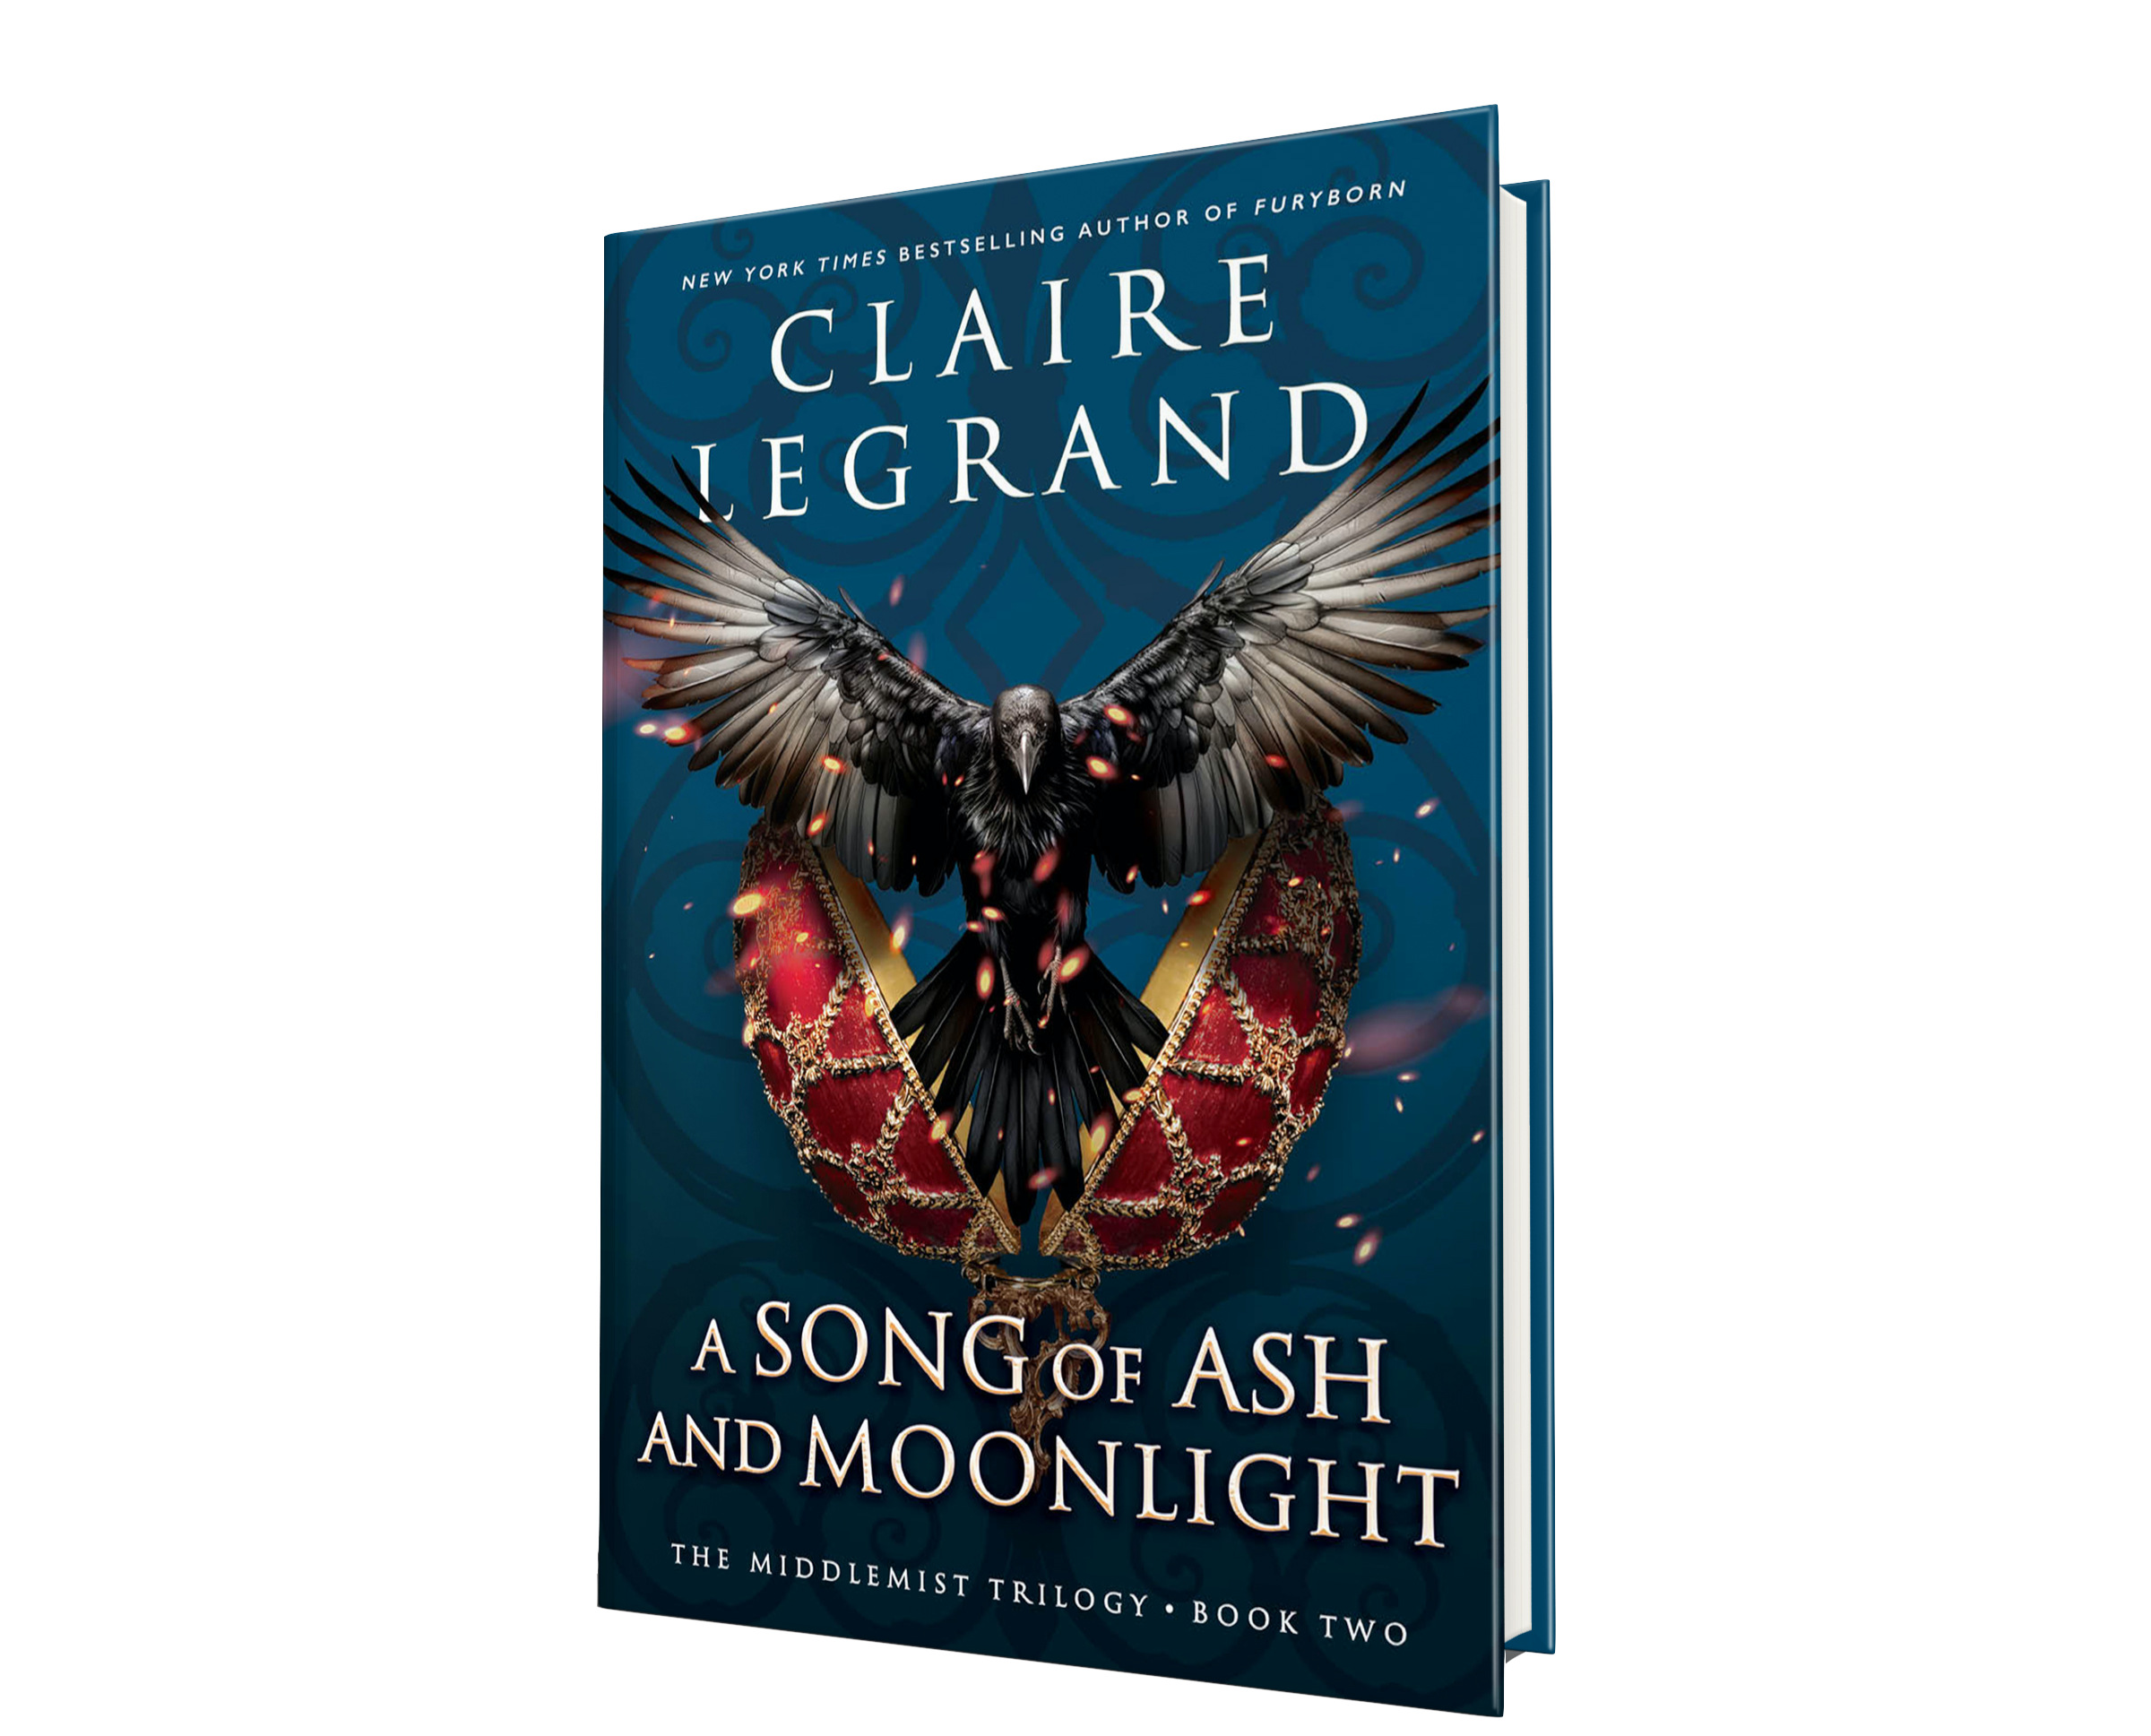 The cover of Claire Legrand's A SONG OF ASH AND MOONLIGHT, featuring a raven bursting out from a Fabergé-style red-and-gold egg, surrounded by embers, on a dark blue background.